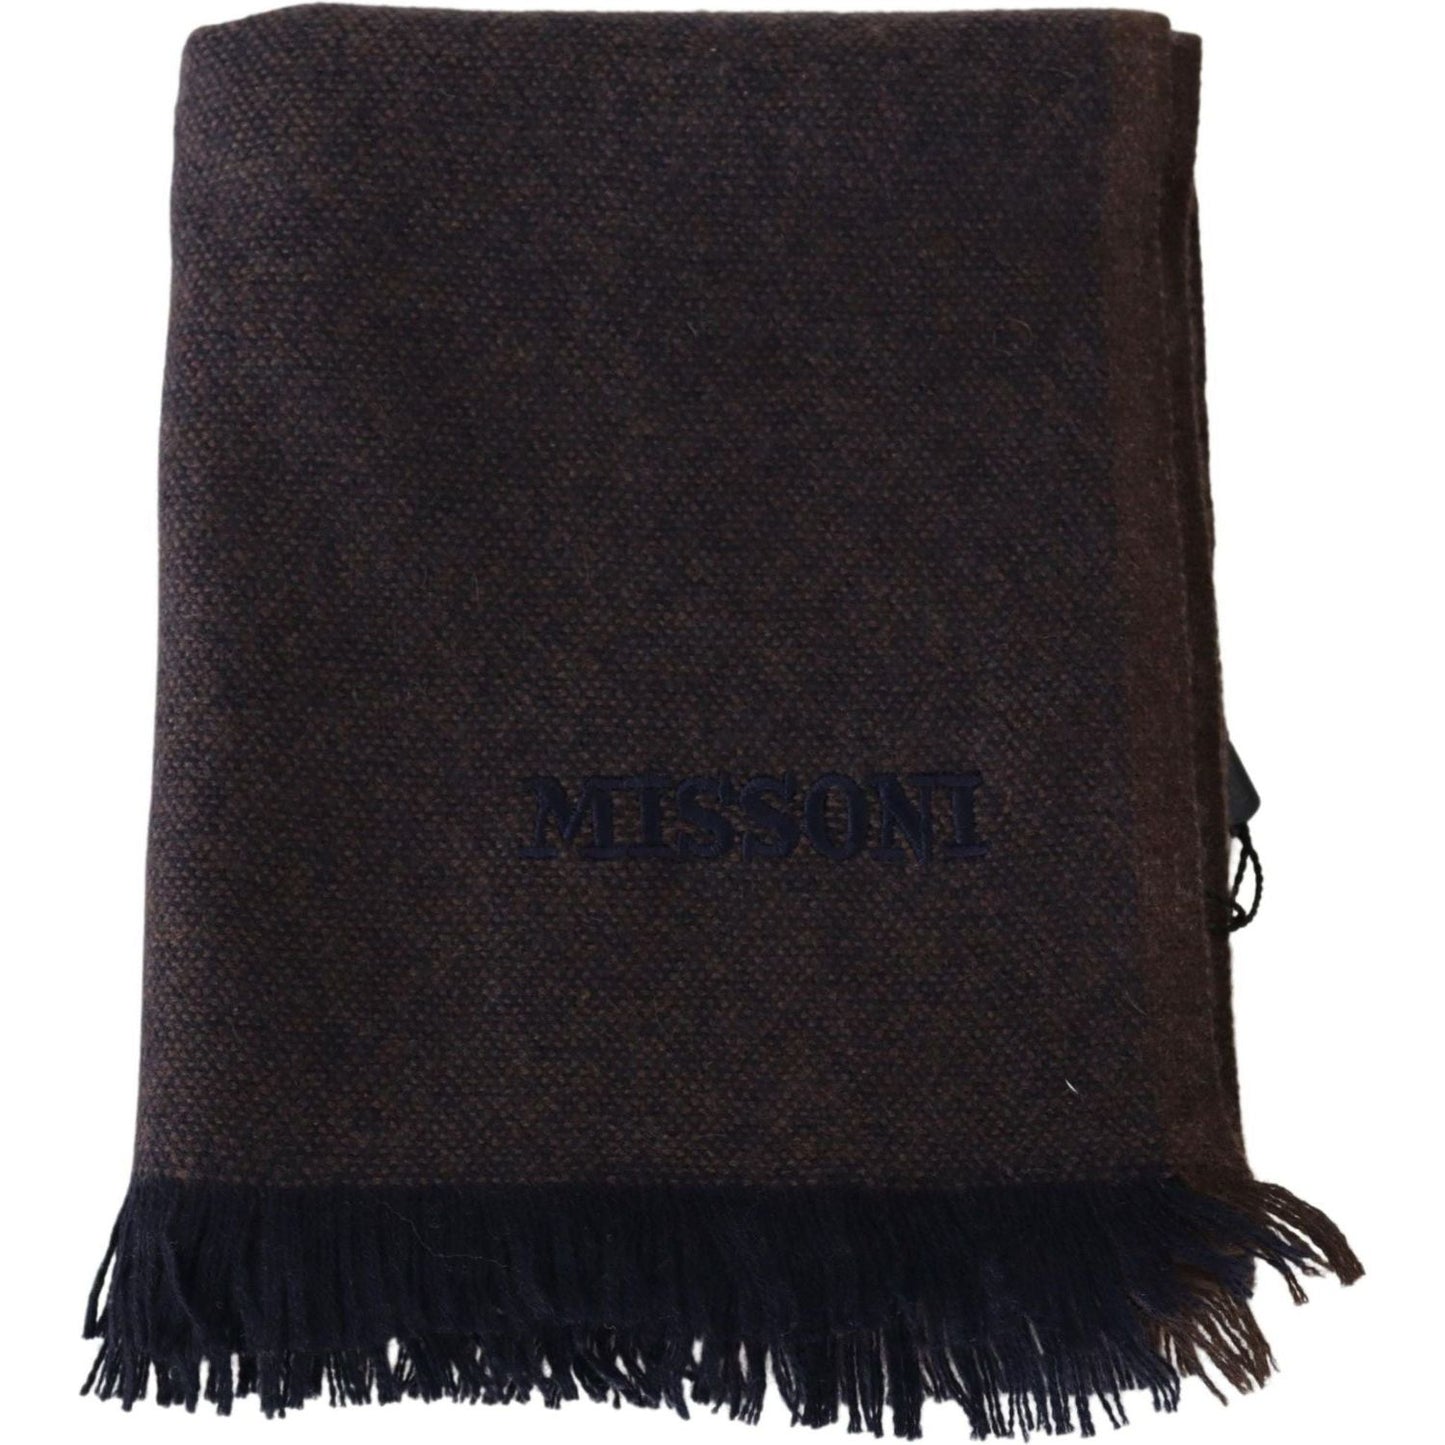 Luxurious Cashmere Unisex Scarf in Brown